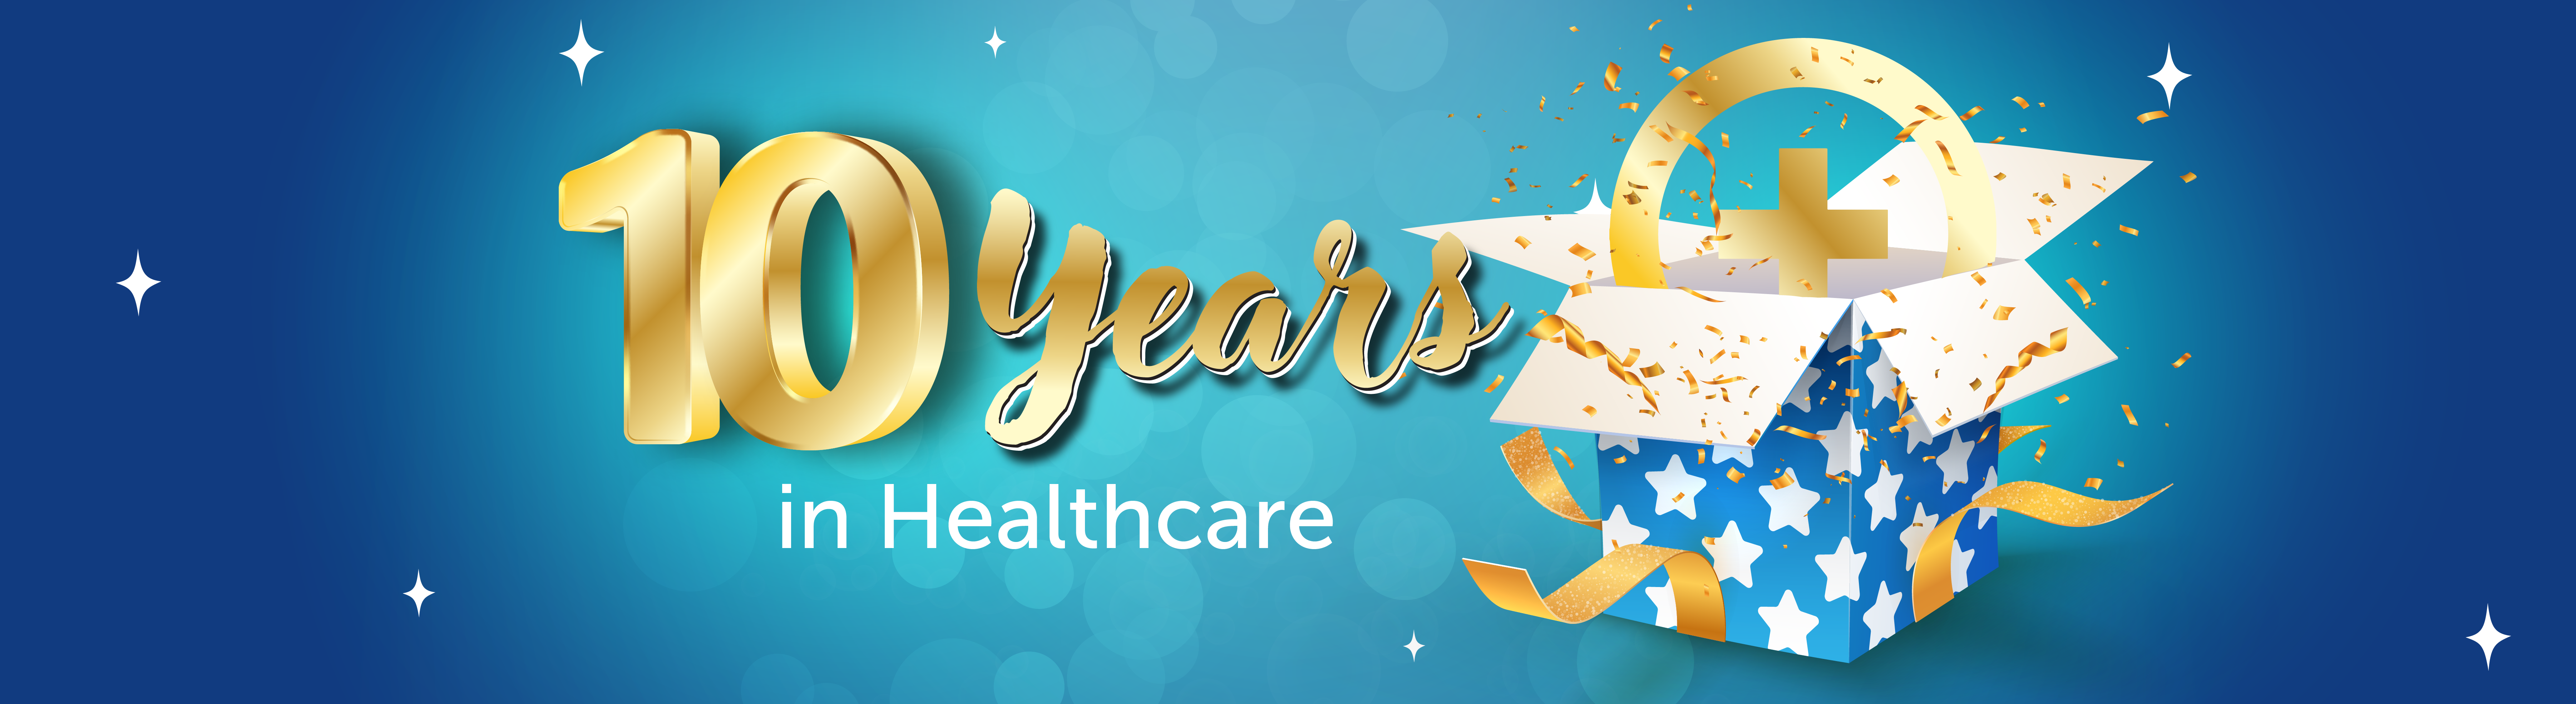 10 years in healthcare